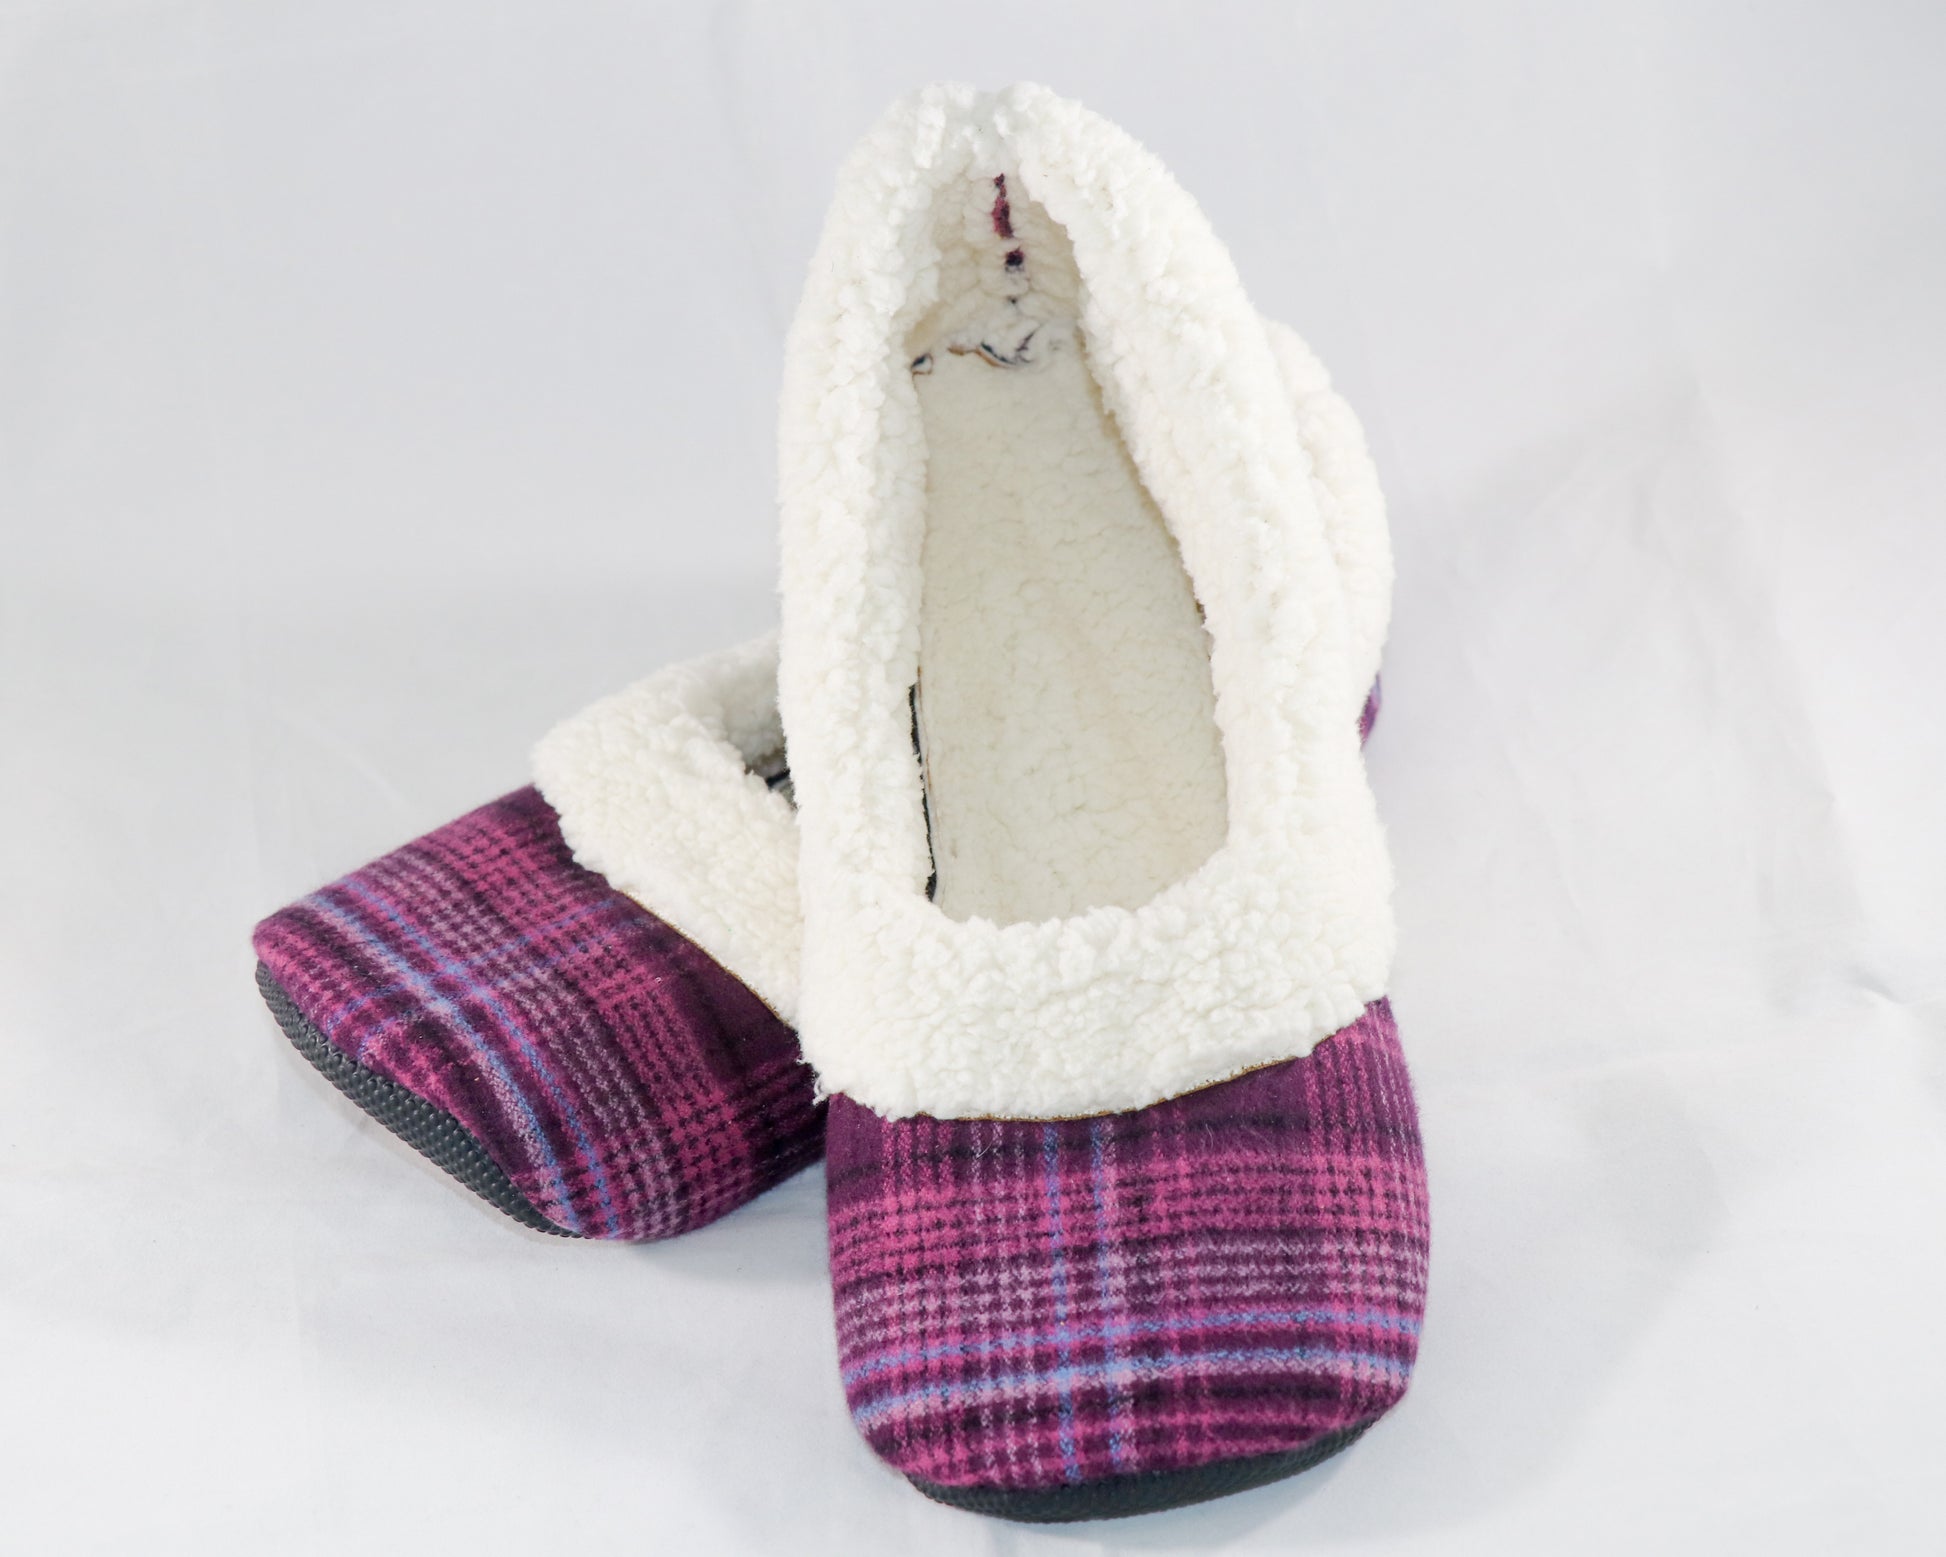 magenta plaid flannel slippers with sherpa lining